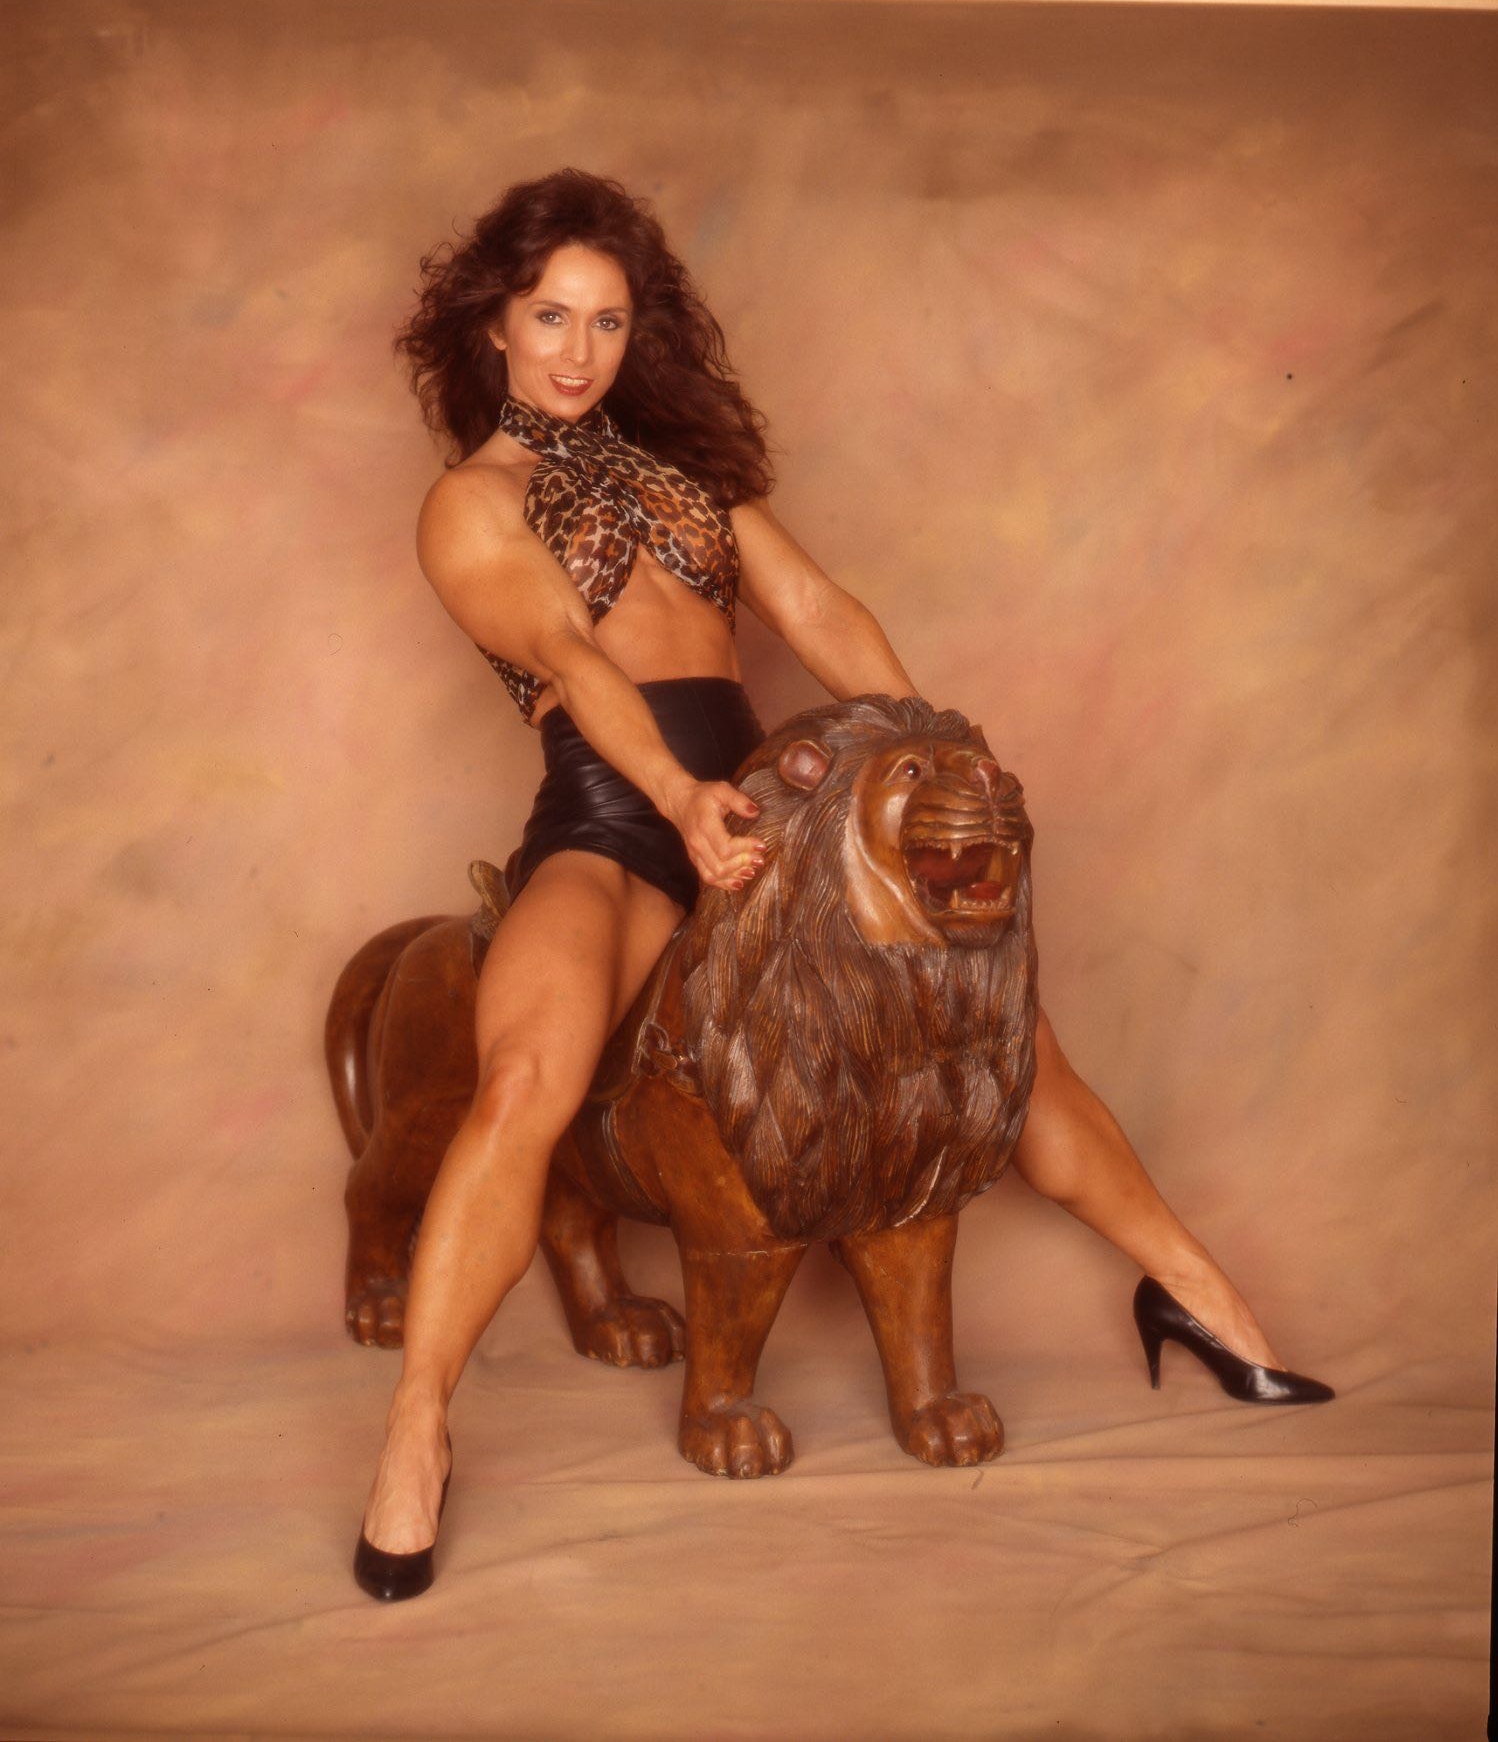 Deb McKnight IFBB Pro in black shorts and leopard top posing on top of a decorative lion at a photo shoot.